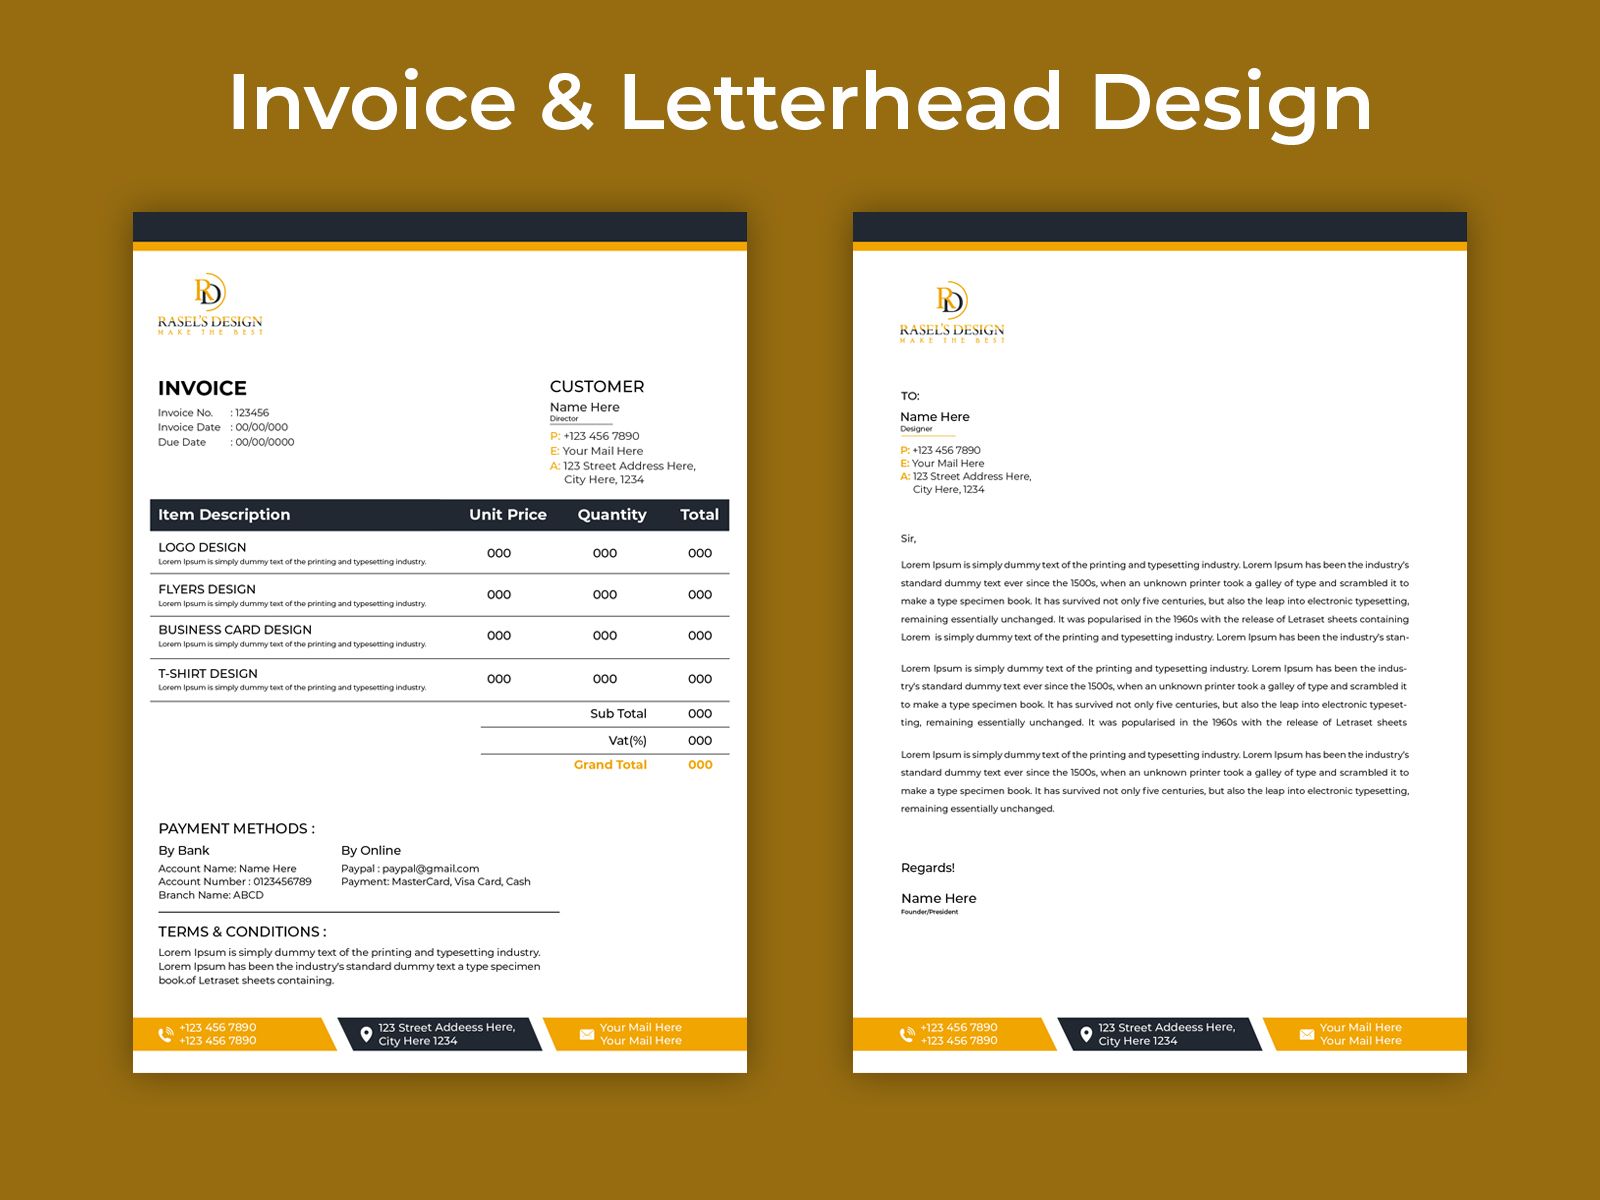 Invoice Letterhead Template by Rasel #39 s Design on Dribbble